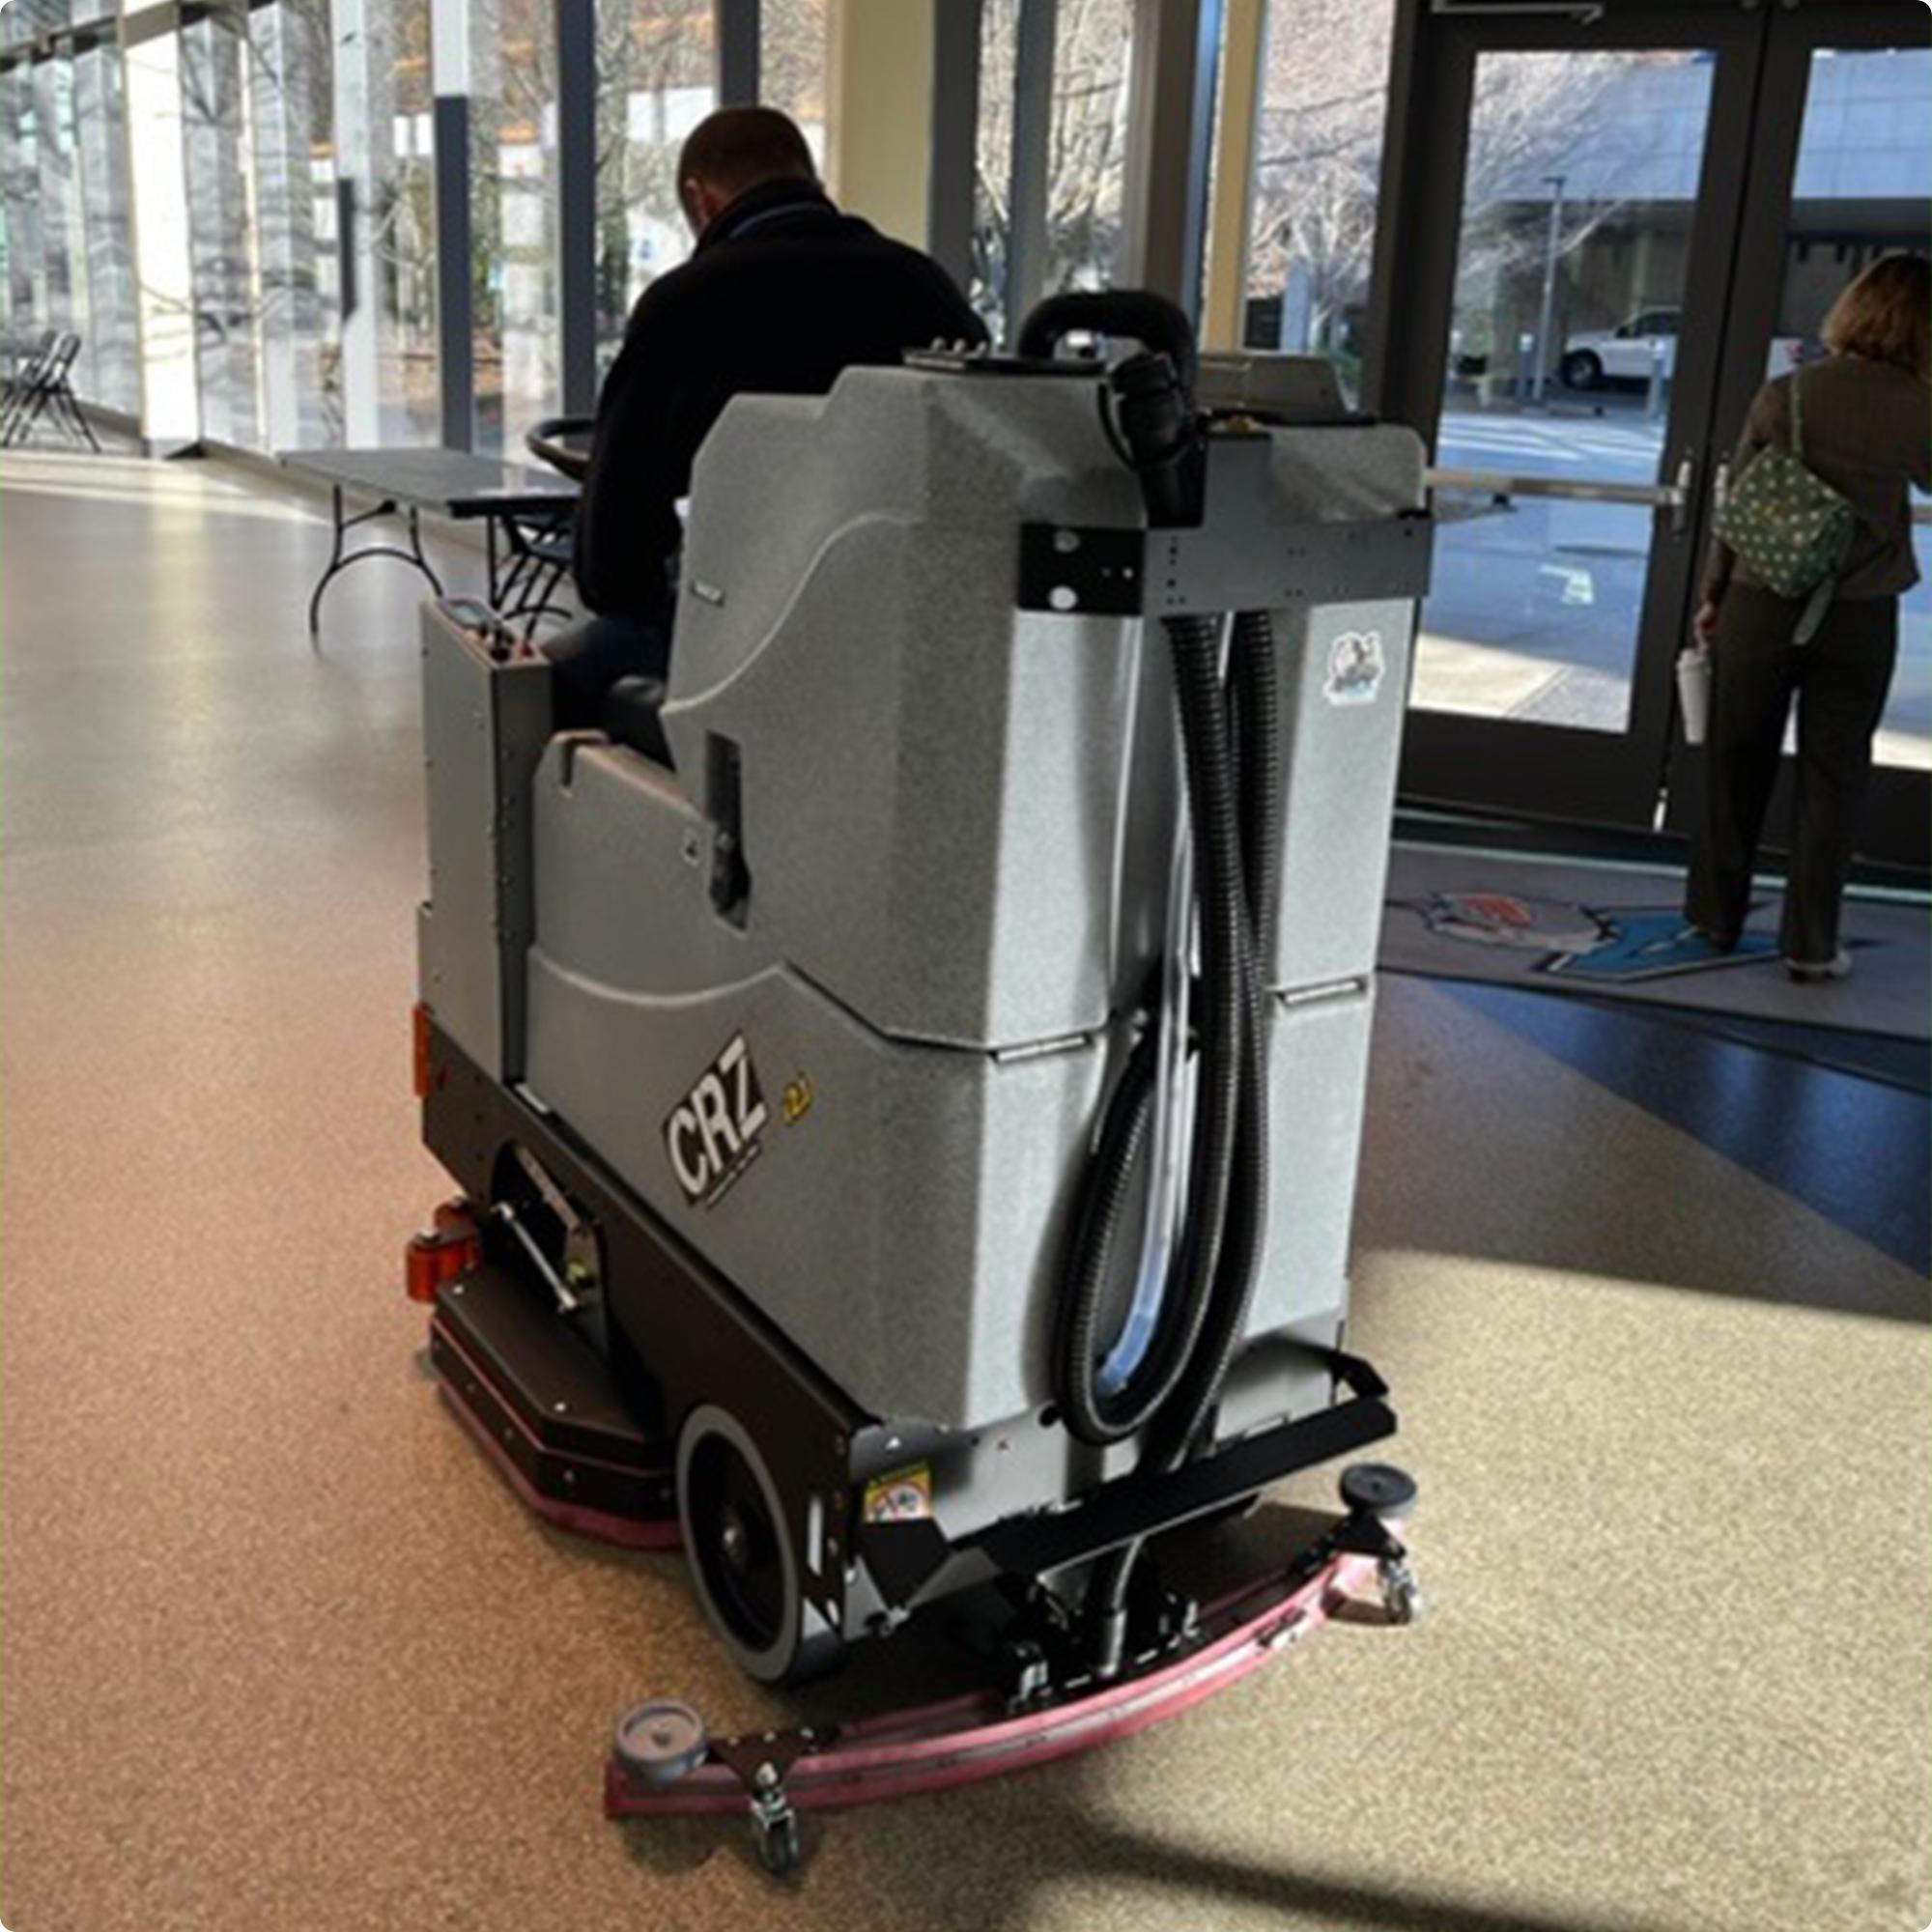 Tomcat CRZ 34" Disk Deck Ride On Floor Scrubber cleaning an epoxy floor in the lobby of an arena IMG00025